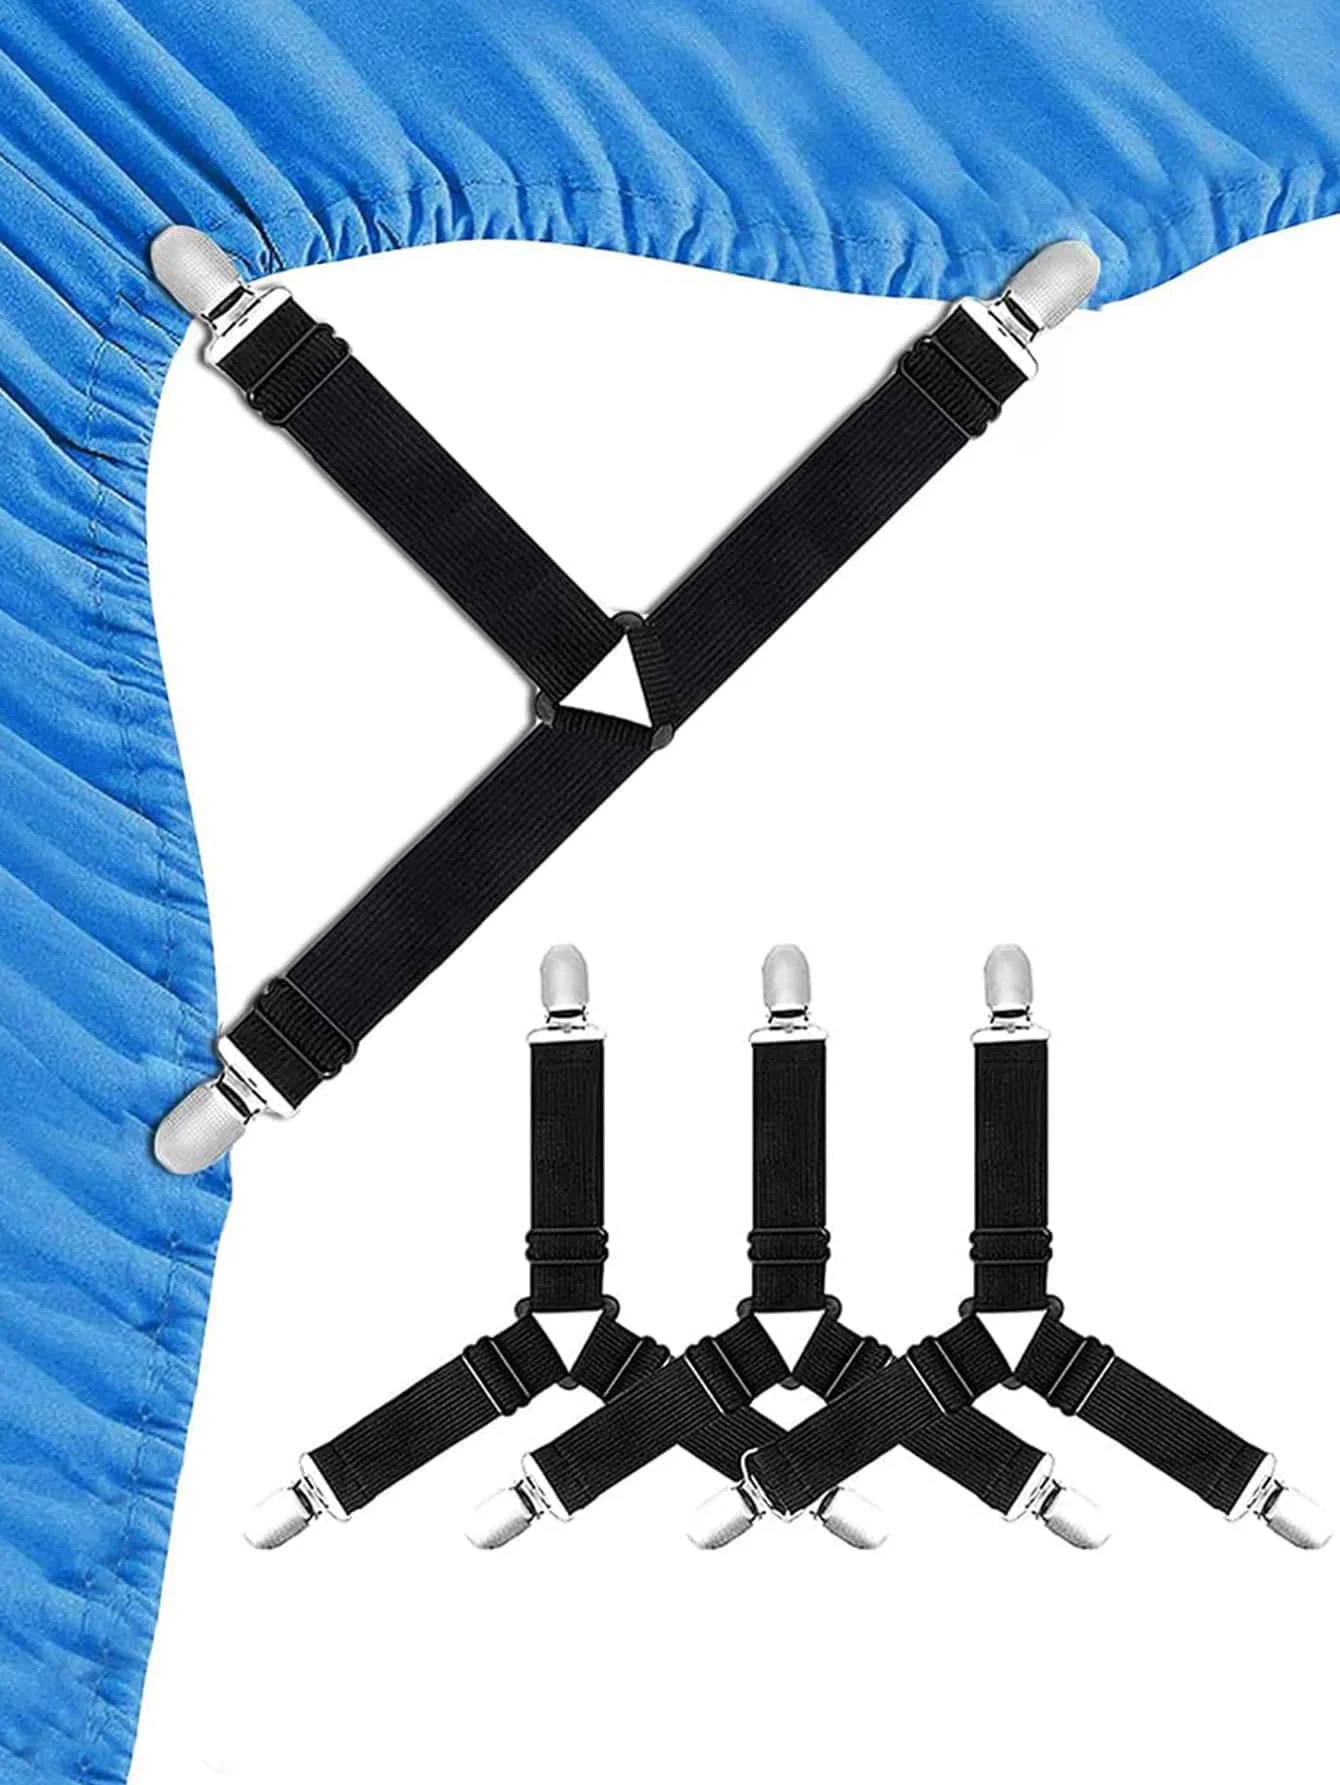 

4 Pcs Triangle Bed Sheet Holders Fitted Sheet Clips Adjustable Sheet Suspenders Mattress Gripper Clips for Bed Mattress Cover